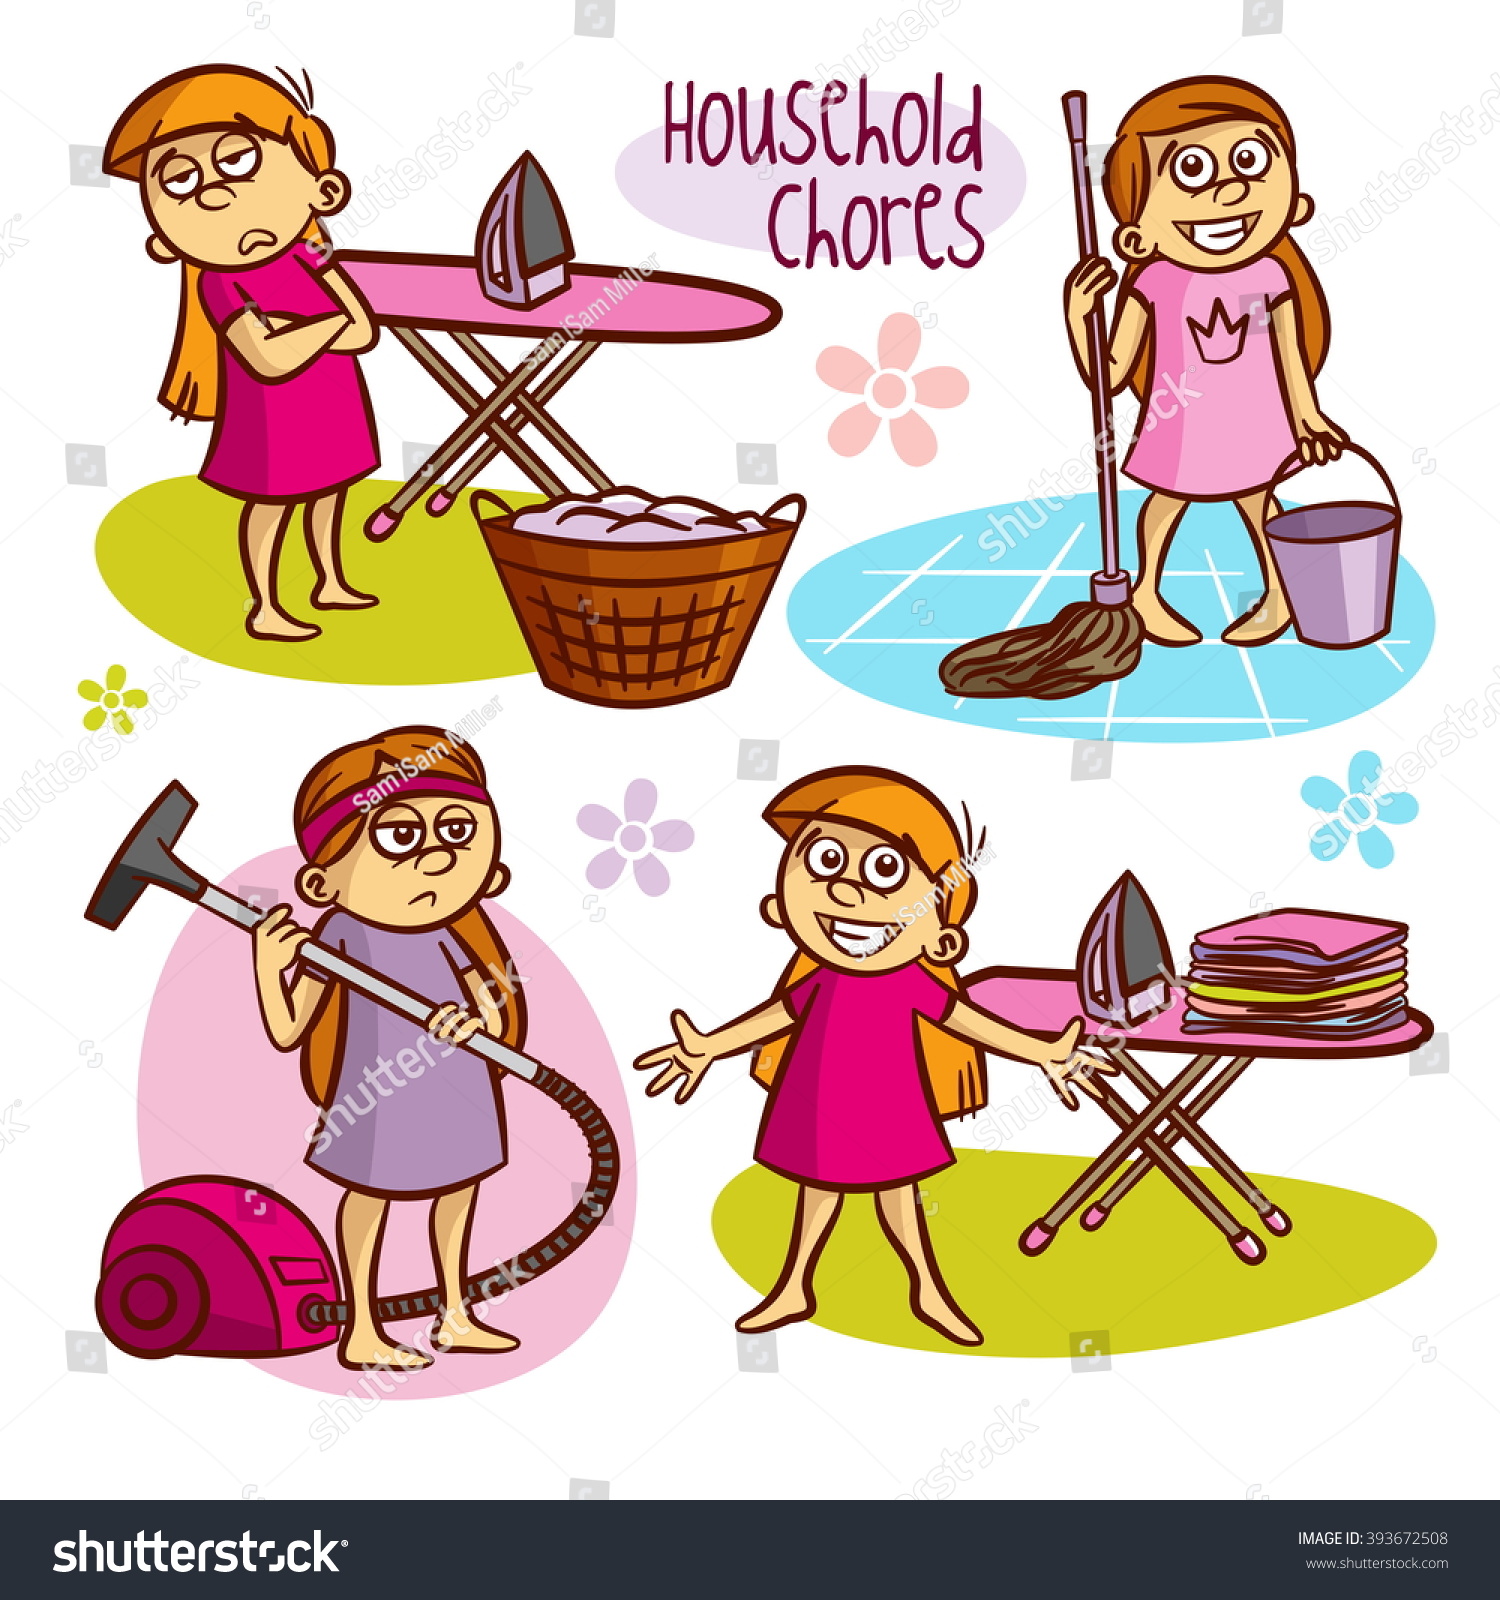 clipart household chores - photo #17